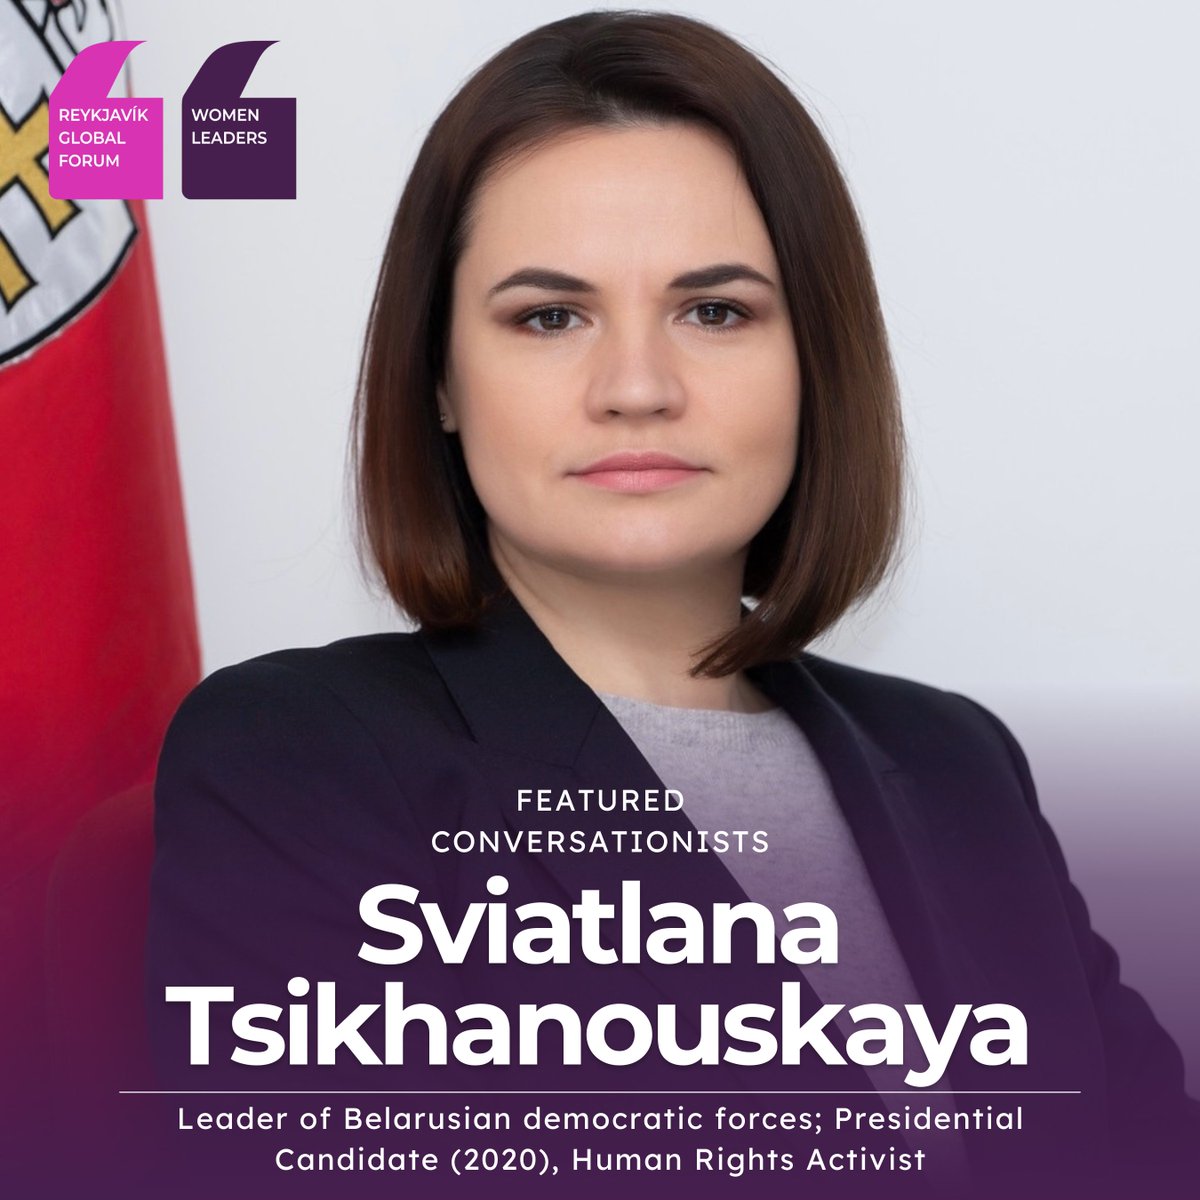 We are excited and honored to welcome Sviatlana Tsikhanouskaya to Reykjavík in November! Have you registered for the Forum this year? #PowerTogether #reykjavik22